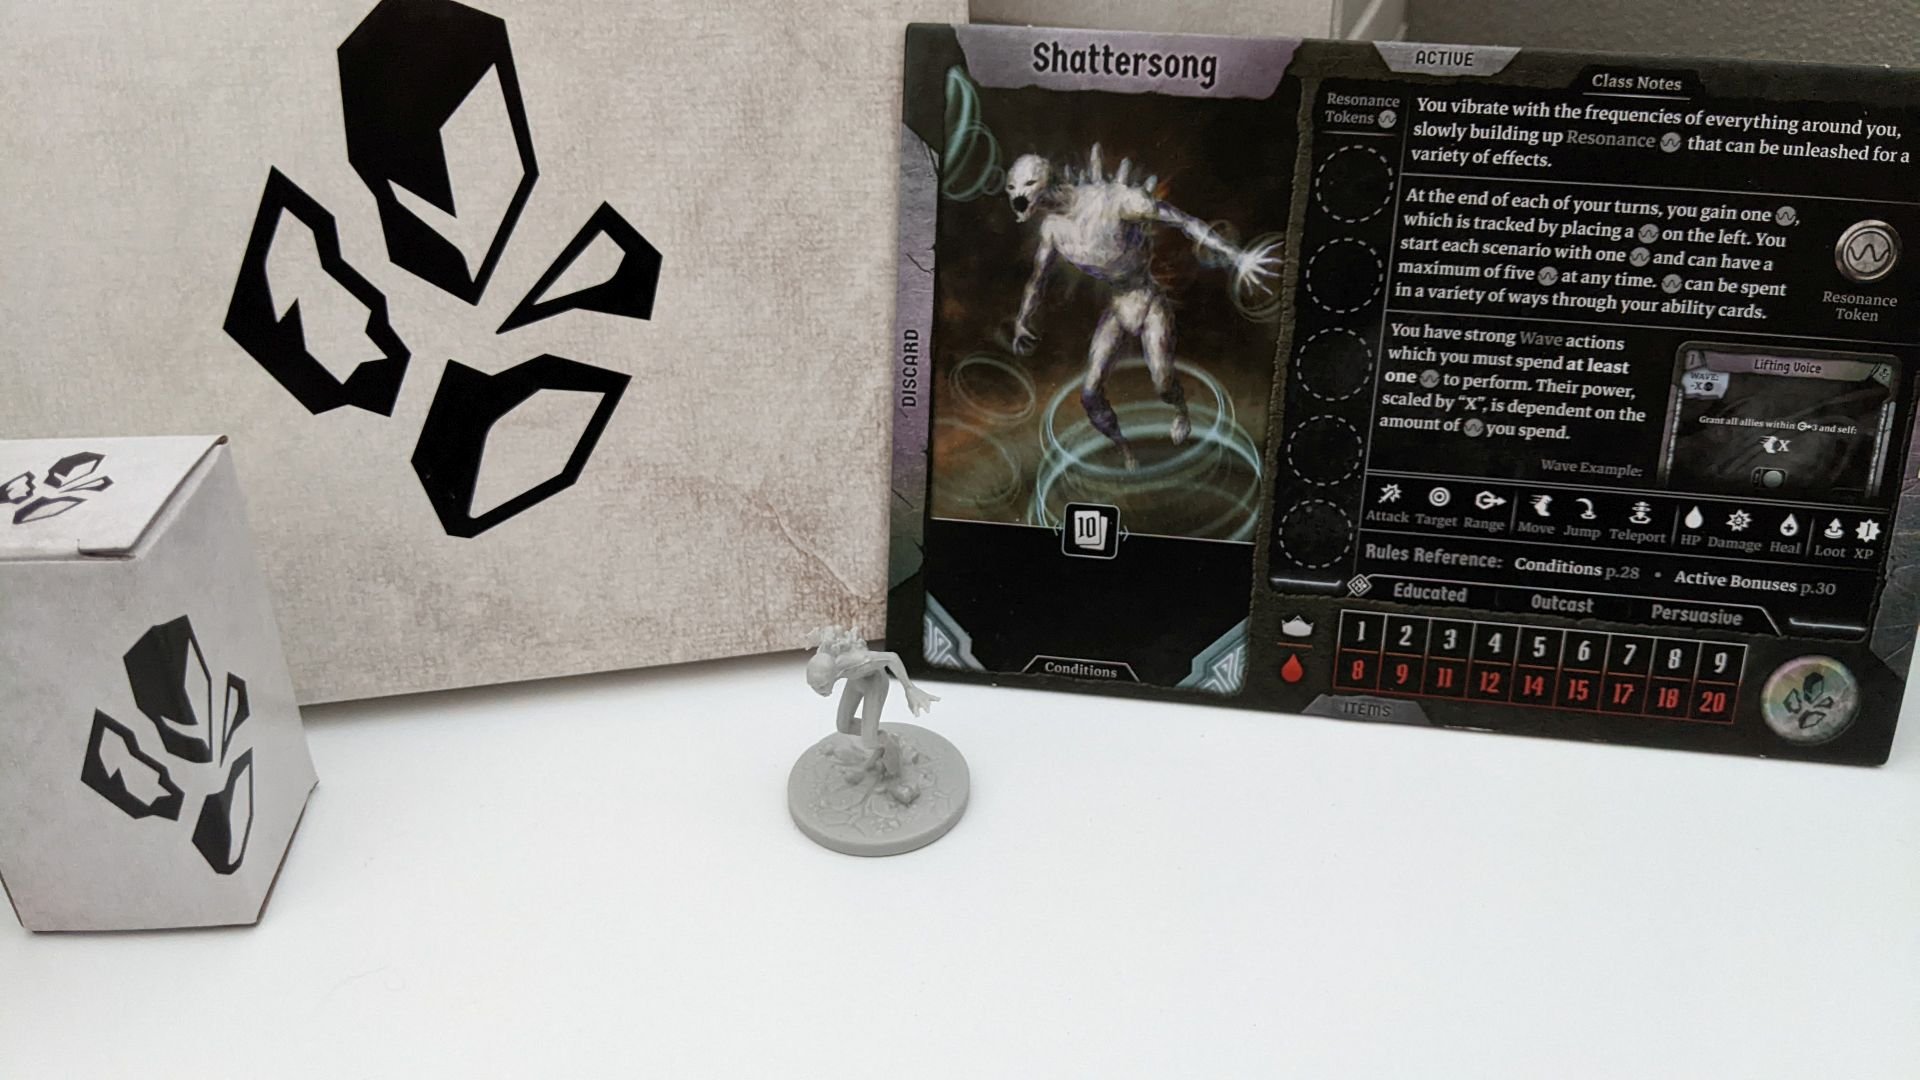 The Shattersong mini from the Frosthaven Advanced Class